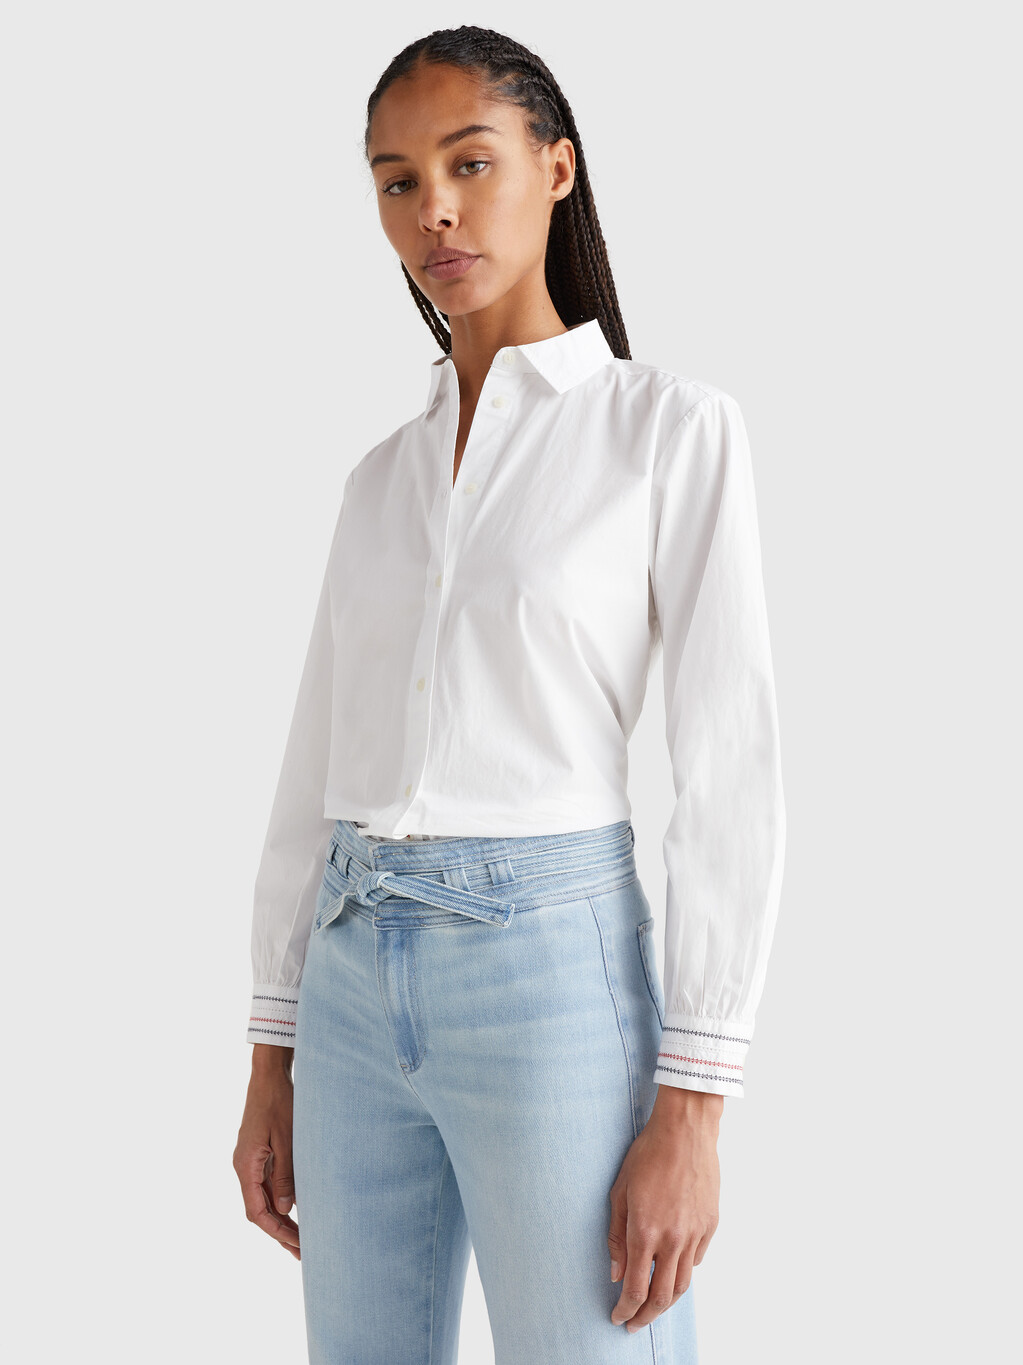 Stitched Stripe Relaxed Fit Blouse, Th Optic White, hi-res